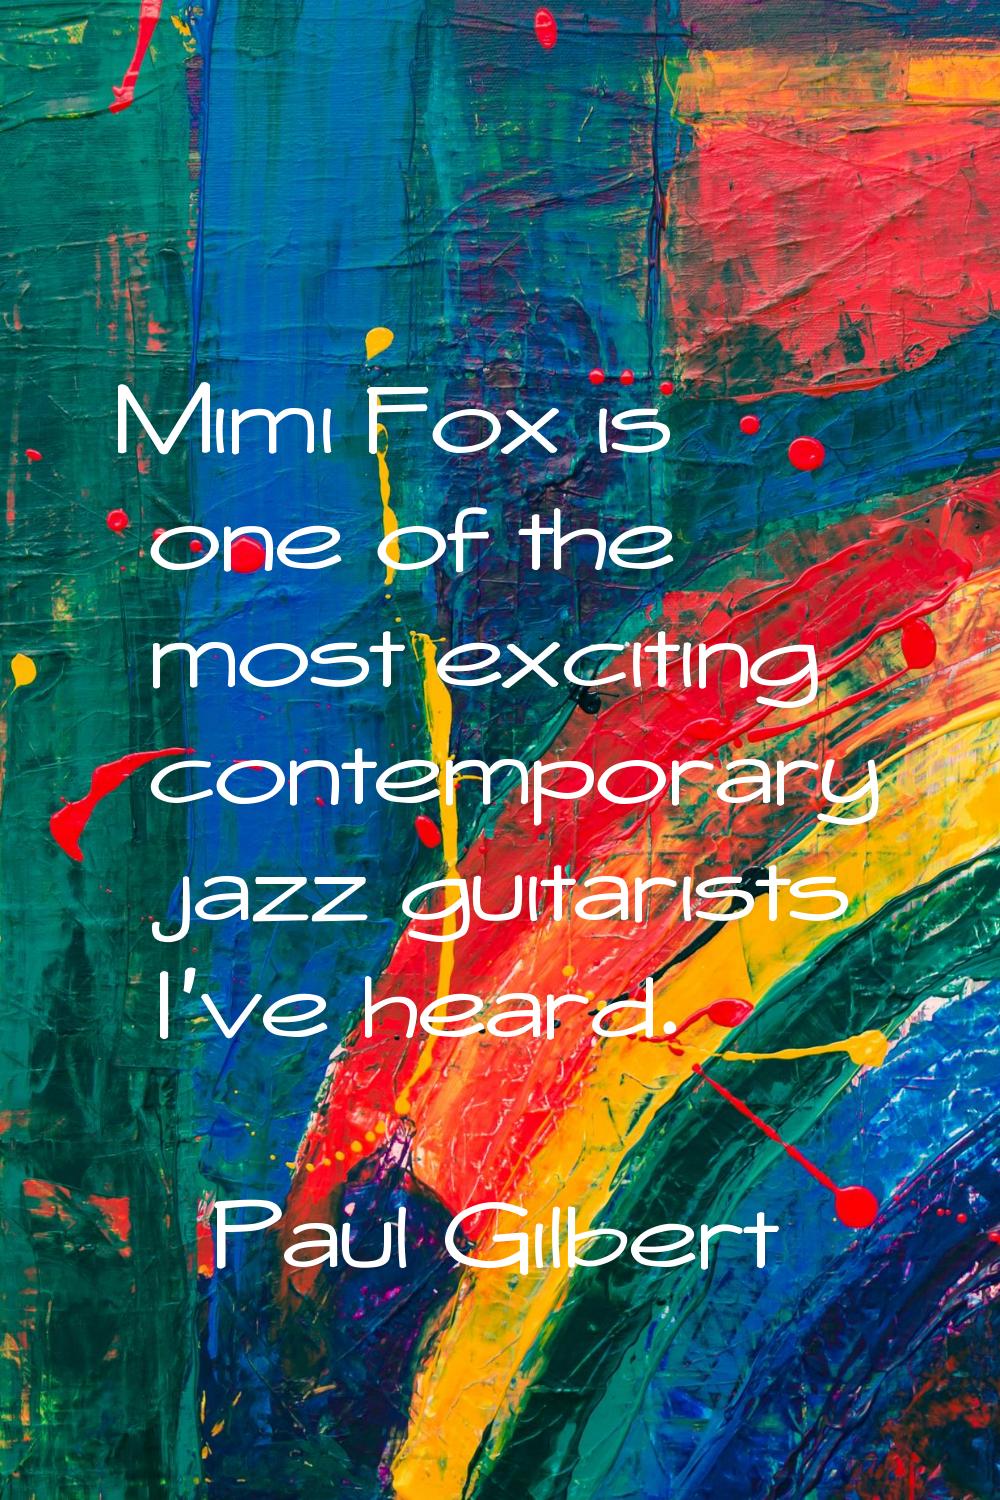 Mimi Fox is one of the most exciting contemporary jazz guitarists I've heard.